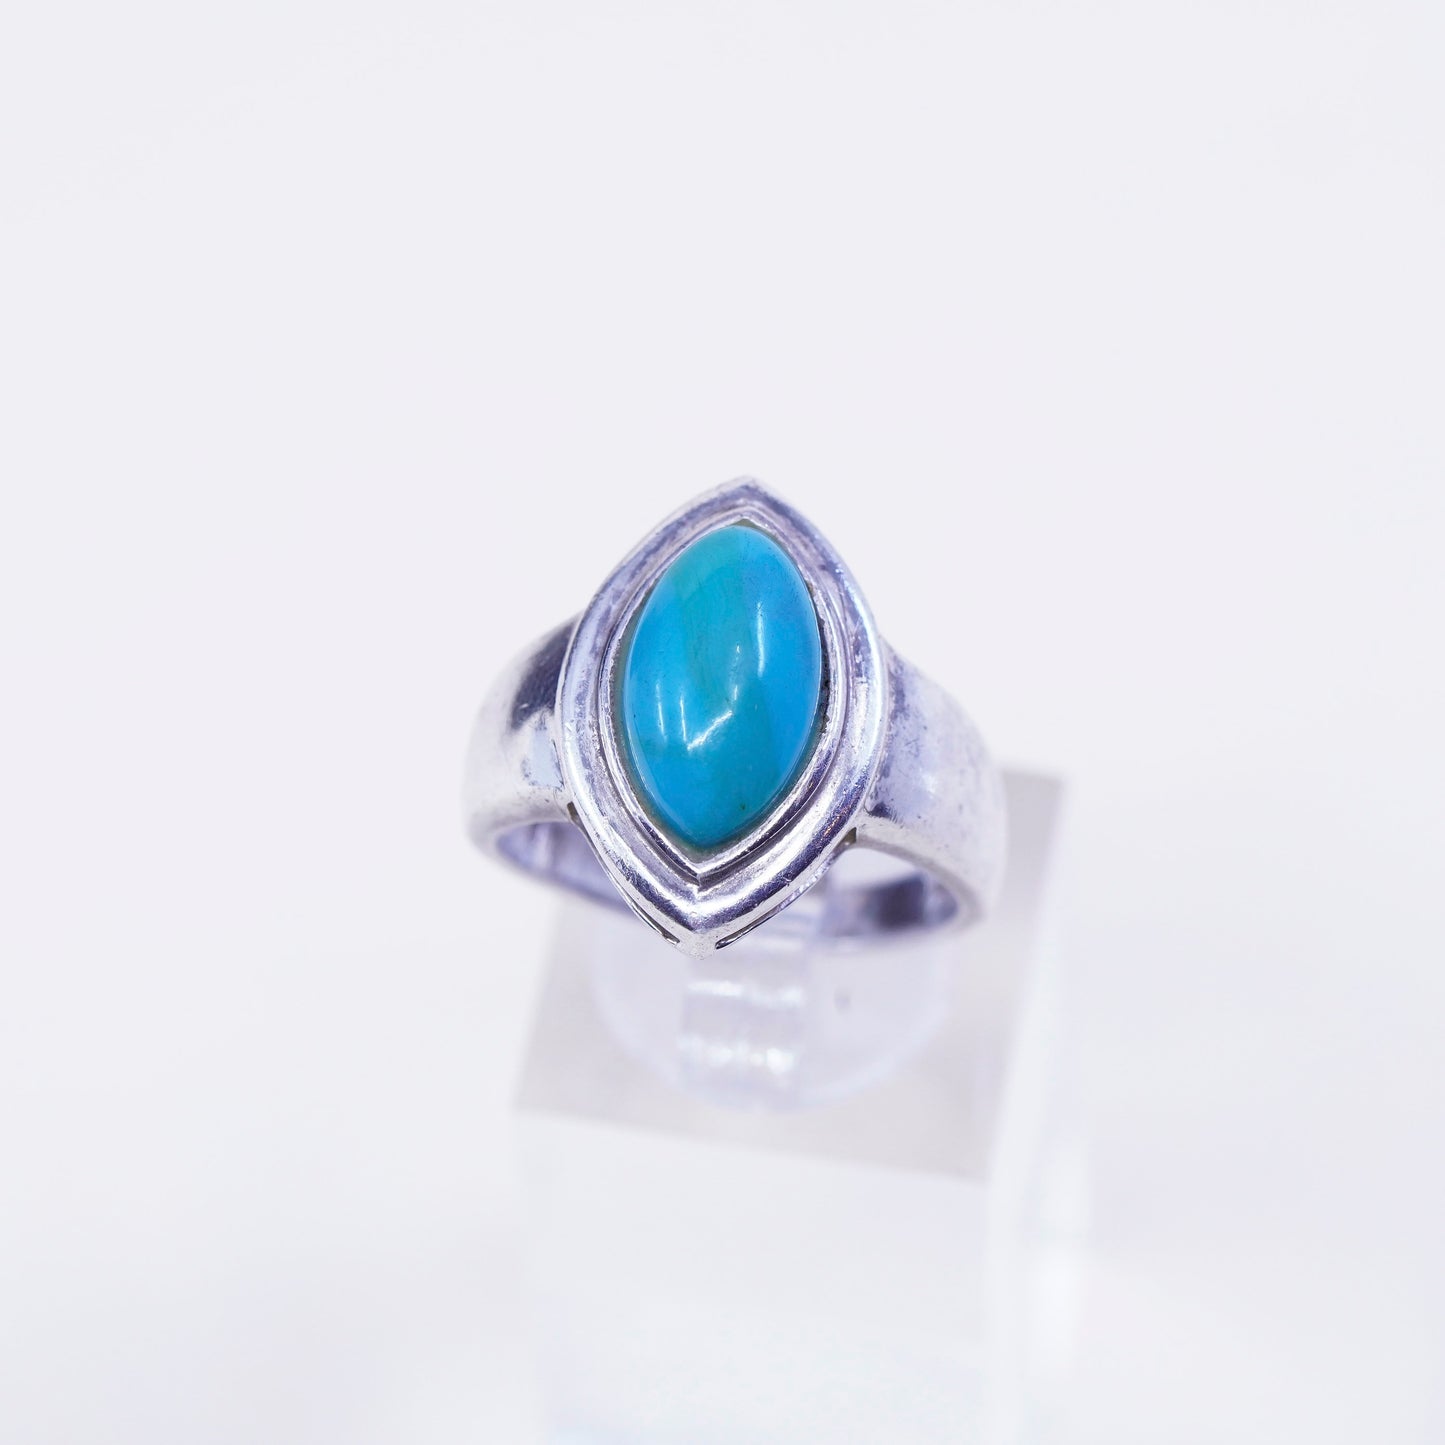 Size 8, southwestern sterling 925 silver handmade ring with Marquise turquoise